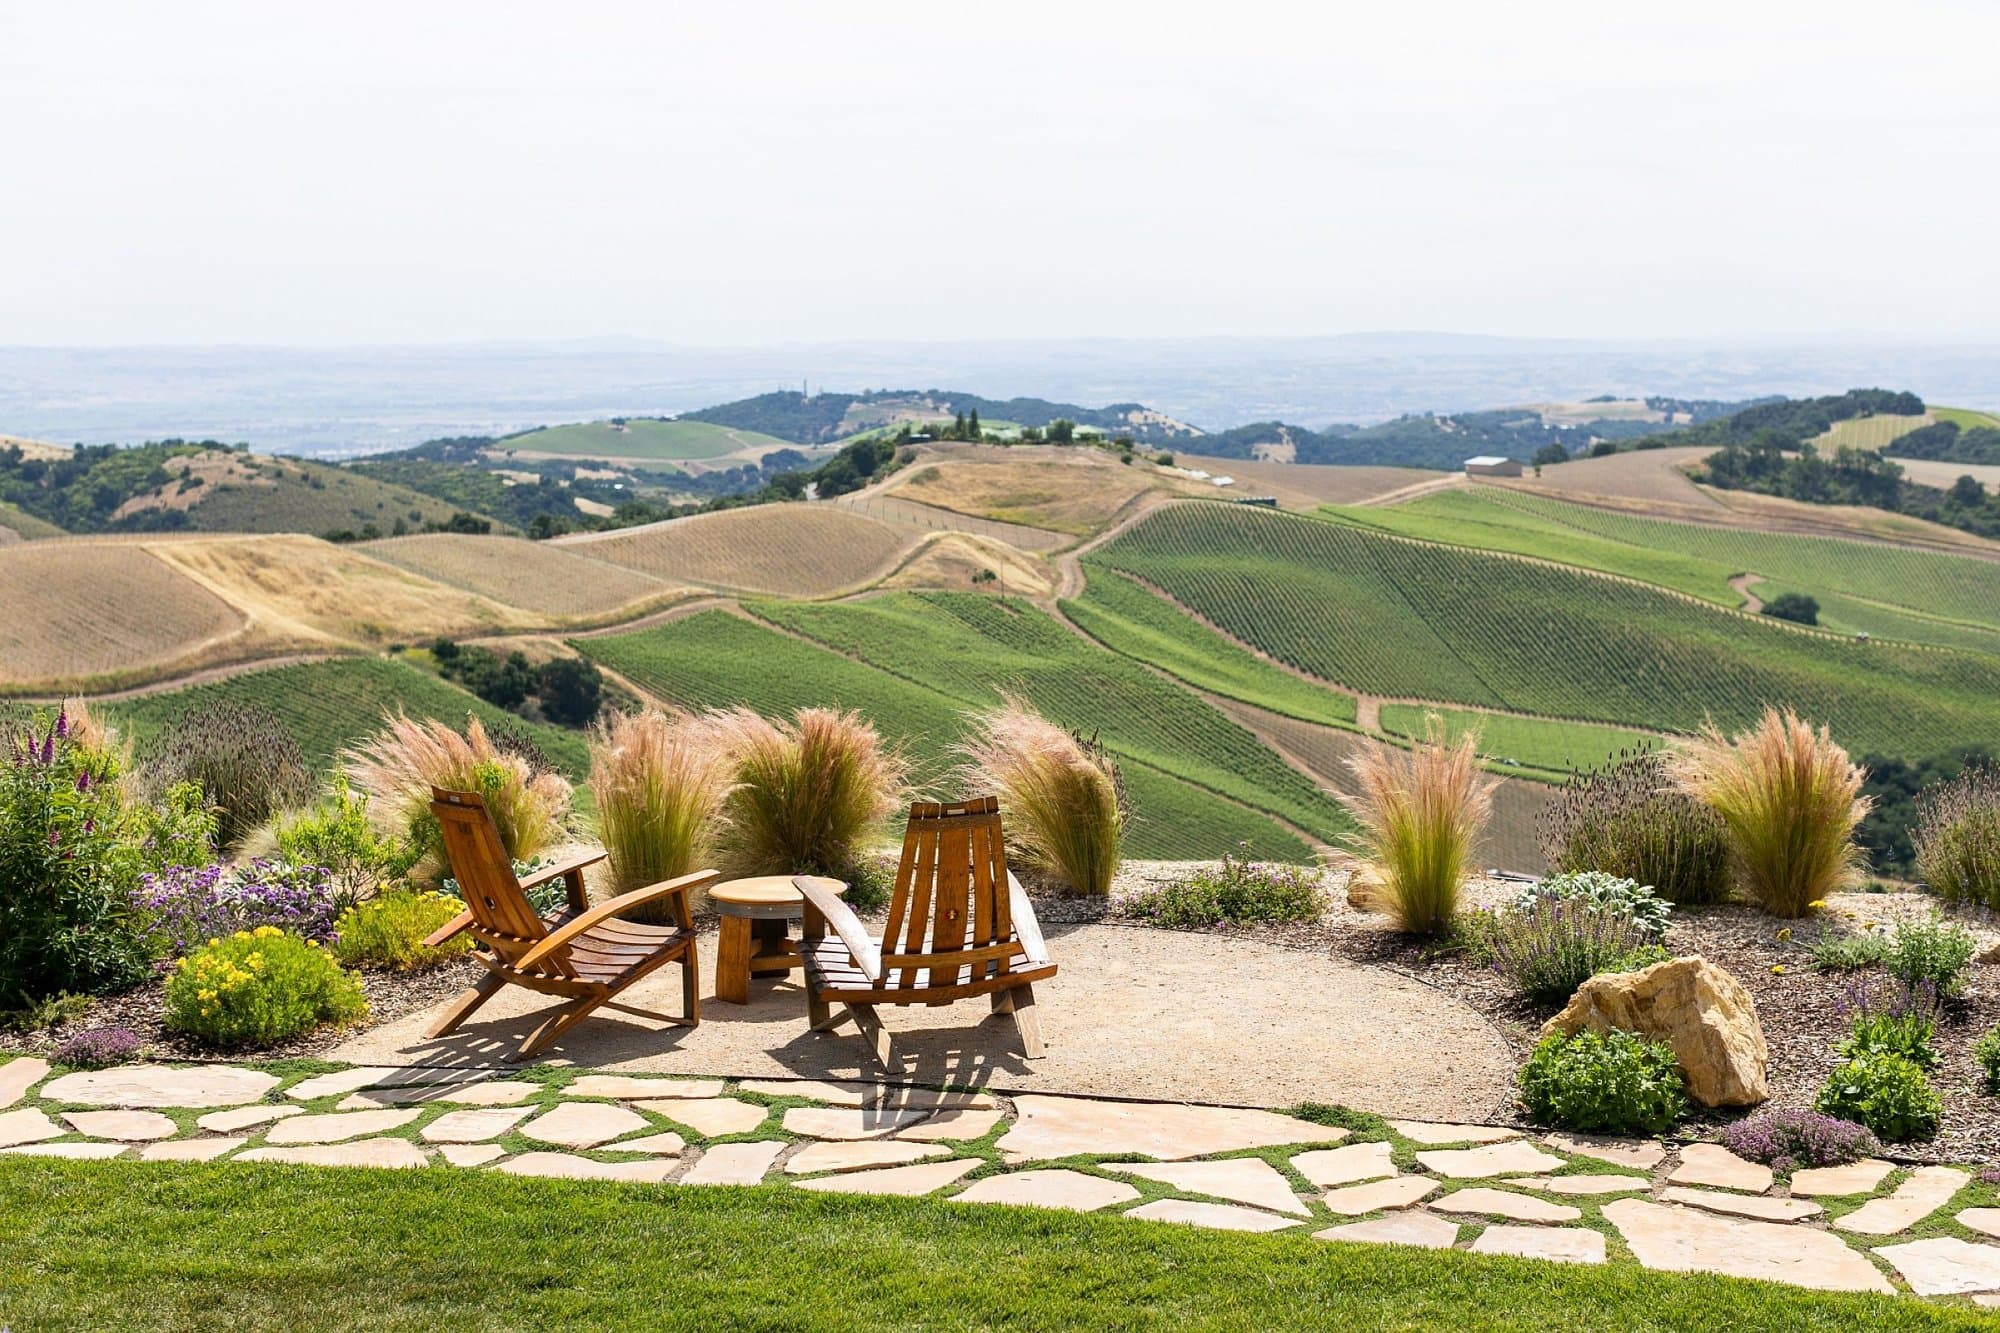 Two Adirondack chairs overlook the vineyards on DAOU Mountain